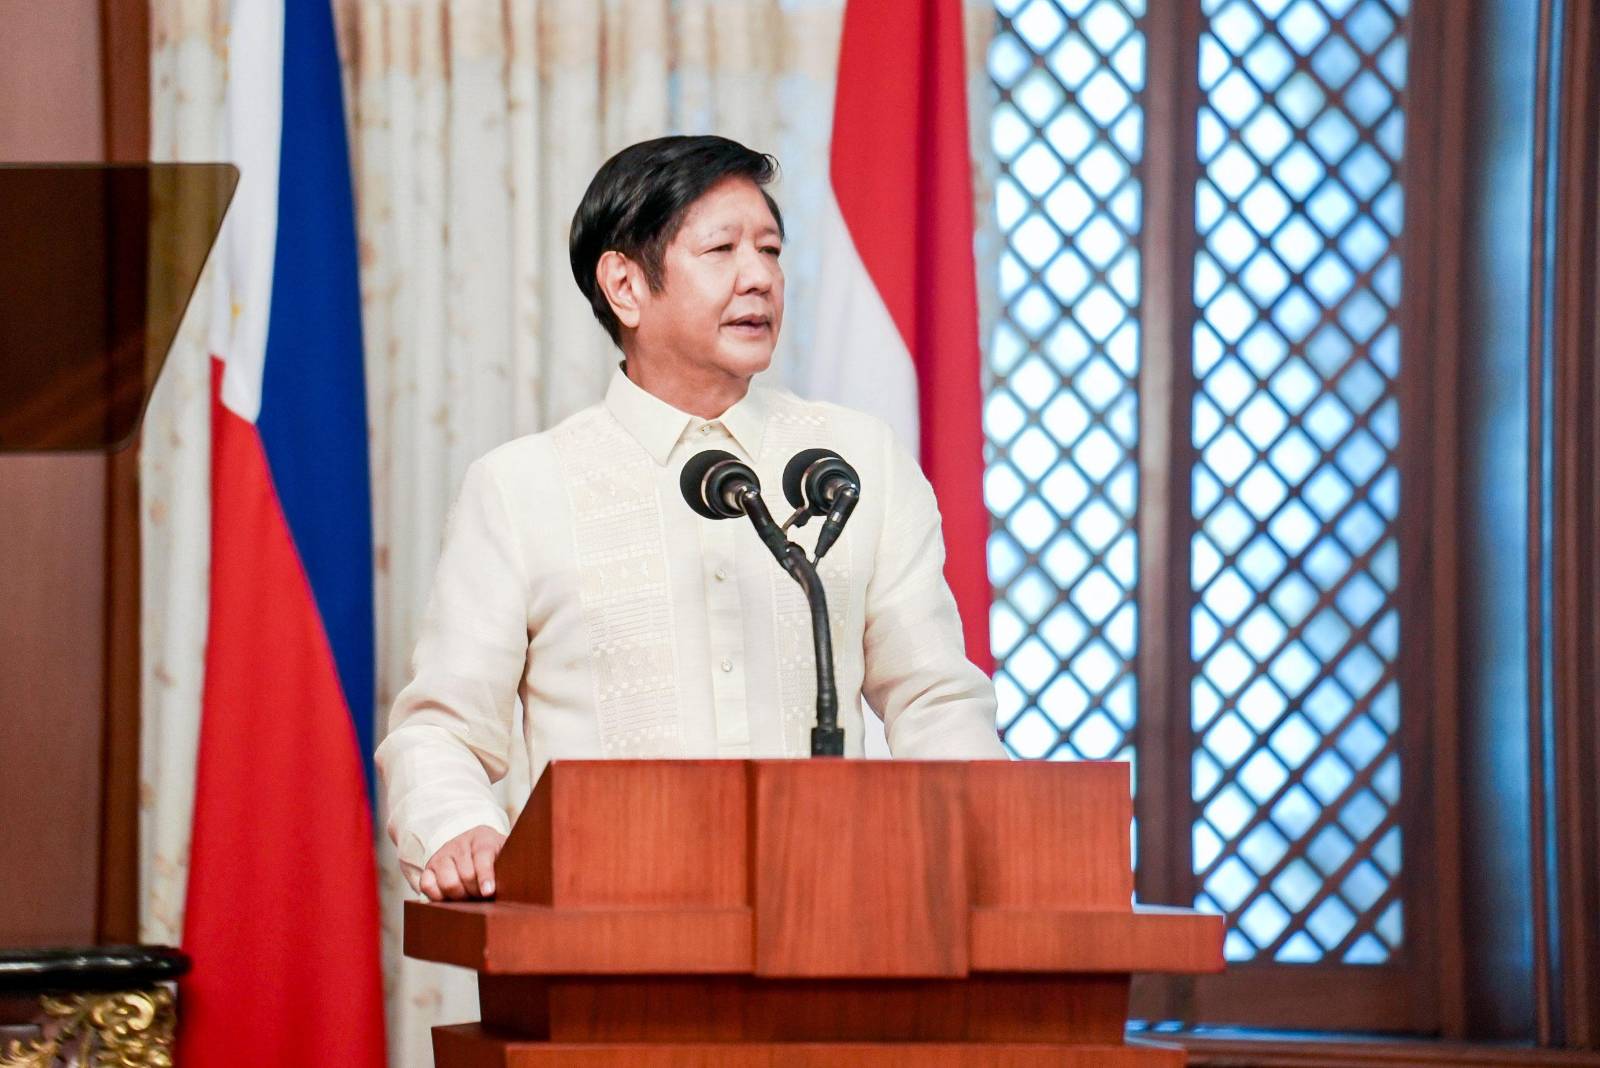 President Ferdinand Marcos Jr. is set to sign a rice agreement with Vietnam during his state visit to the country later this January, according to Agriculture Secretary Francisco Laurel Jr. on Tuesday. 